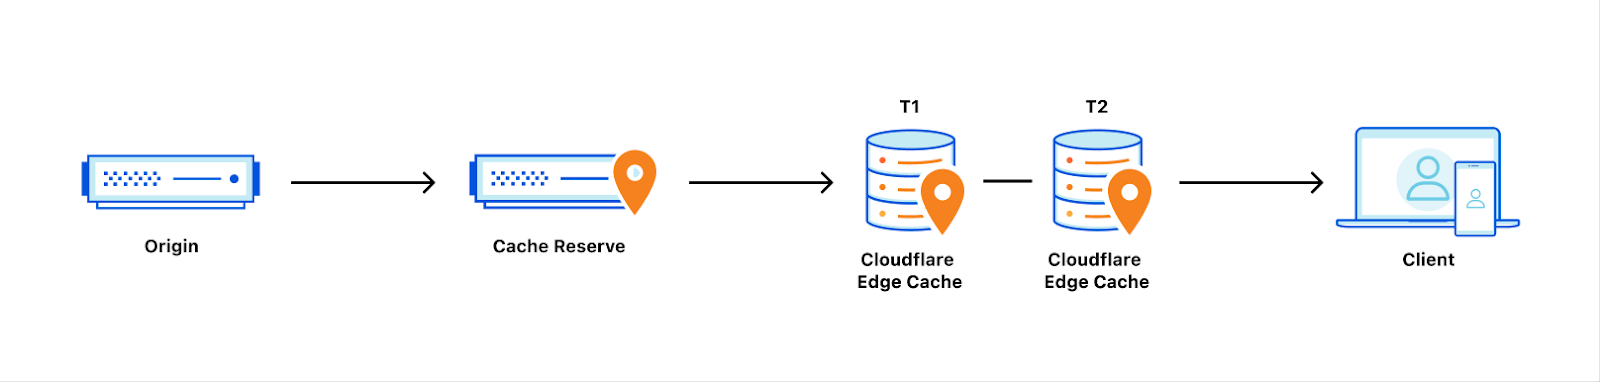 content served from origin and getting cached in Cache Reserve, and Edge Cache Data Centers (T1=upper-tier, T2=lower-tier) on its way back to the client